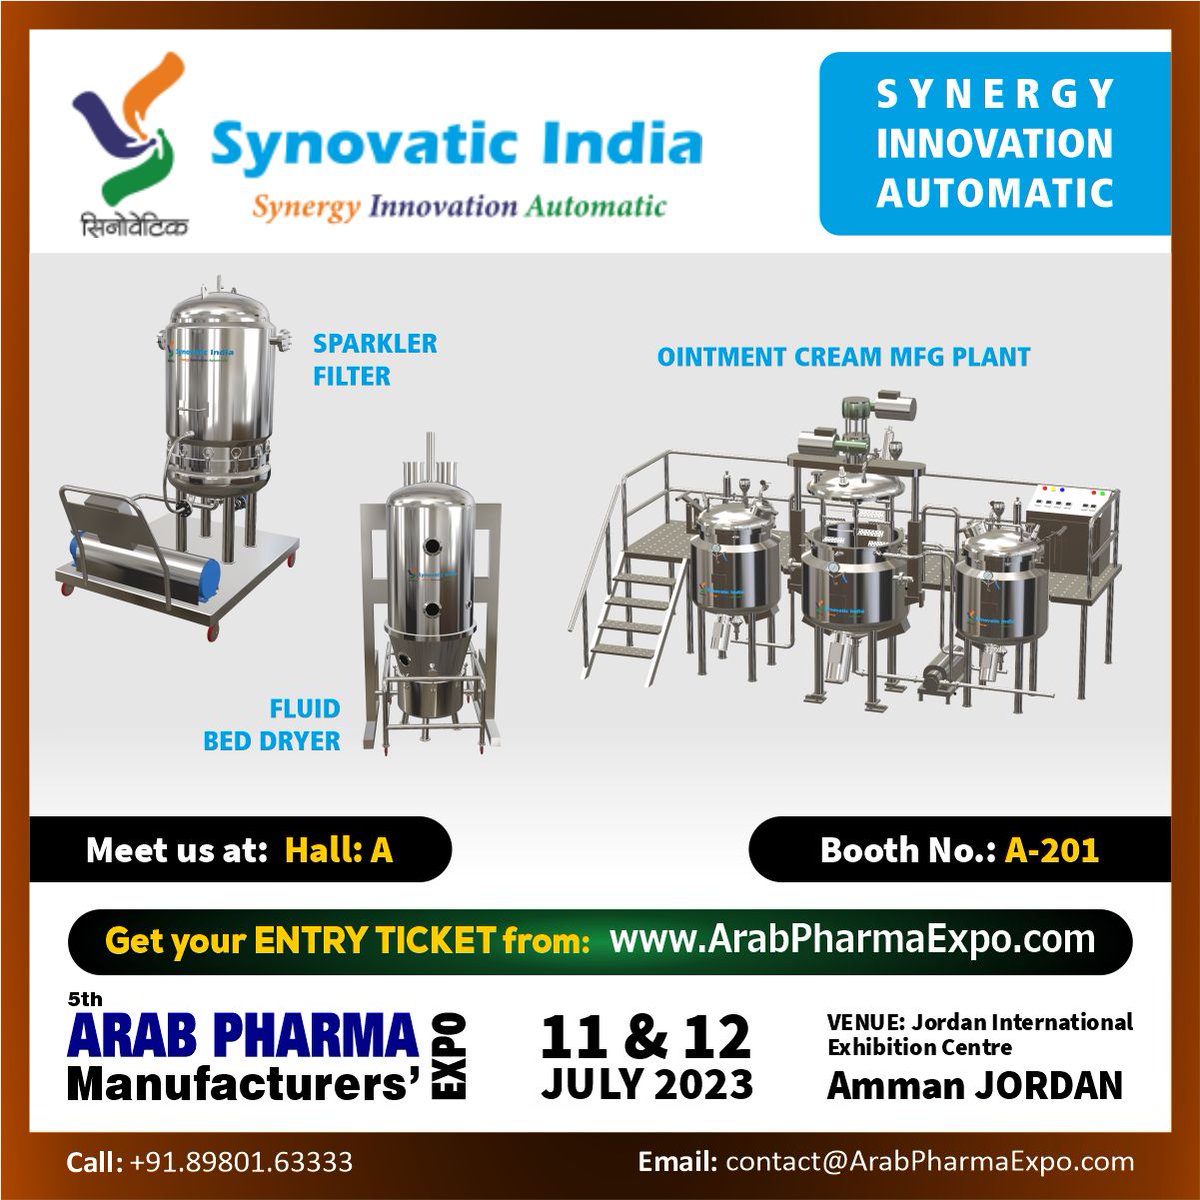 Meet us @Synovatic 

ARAB PHARMA MANUFACTURERS’ EXPO 2023
Date: July 11-12, 2023
Venue: Jordan International Exhibition Center

For more information and Booth Booking
Email us at: contact@arabpharmaexpo.com

#ArabPharmaExpo2023 #ArabPharmaExpo #Jordan